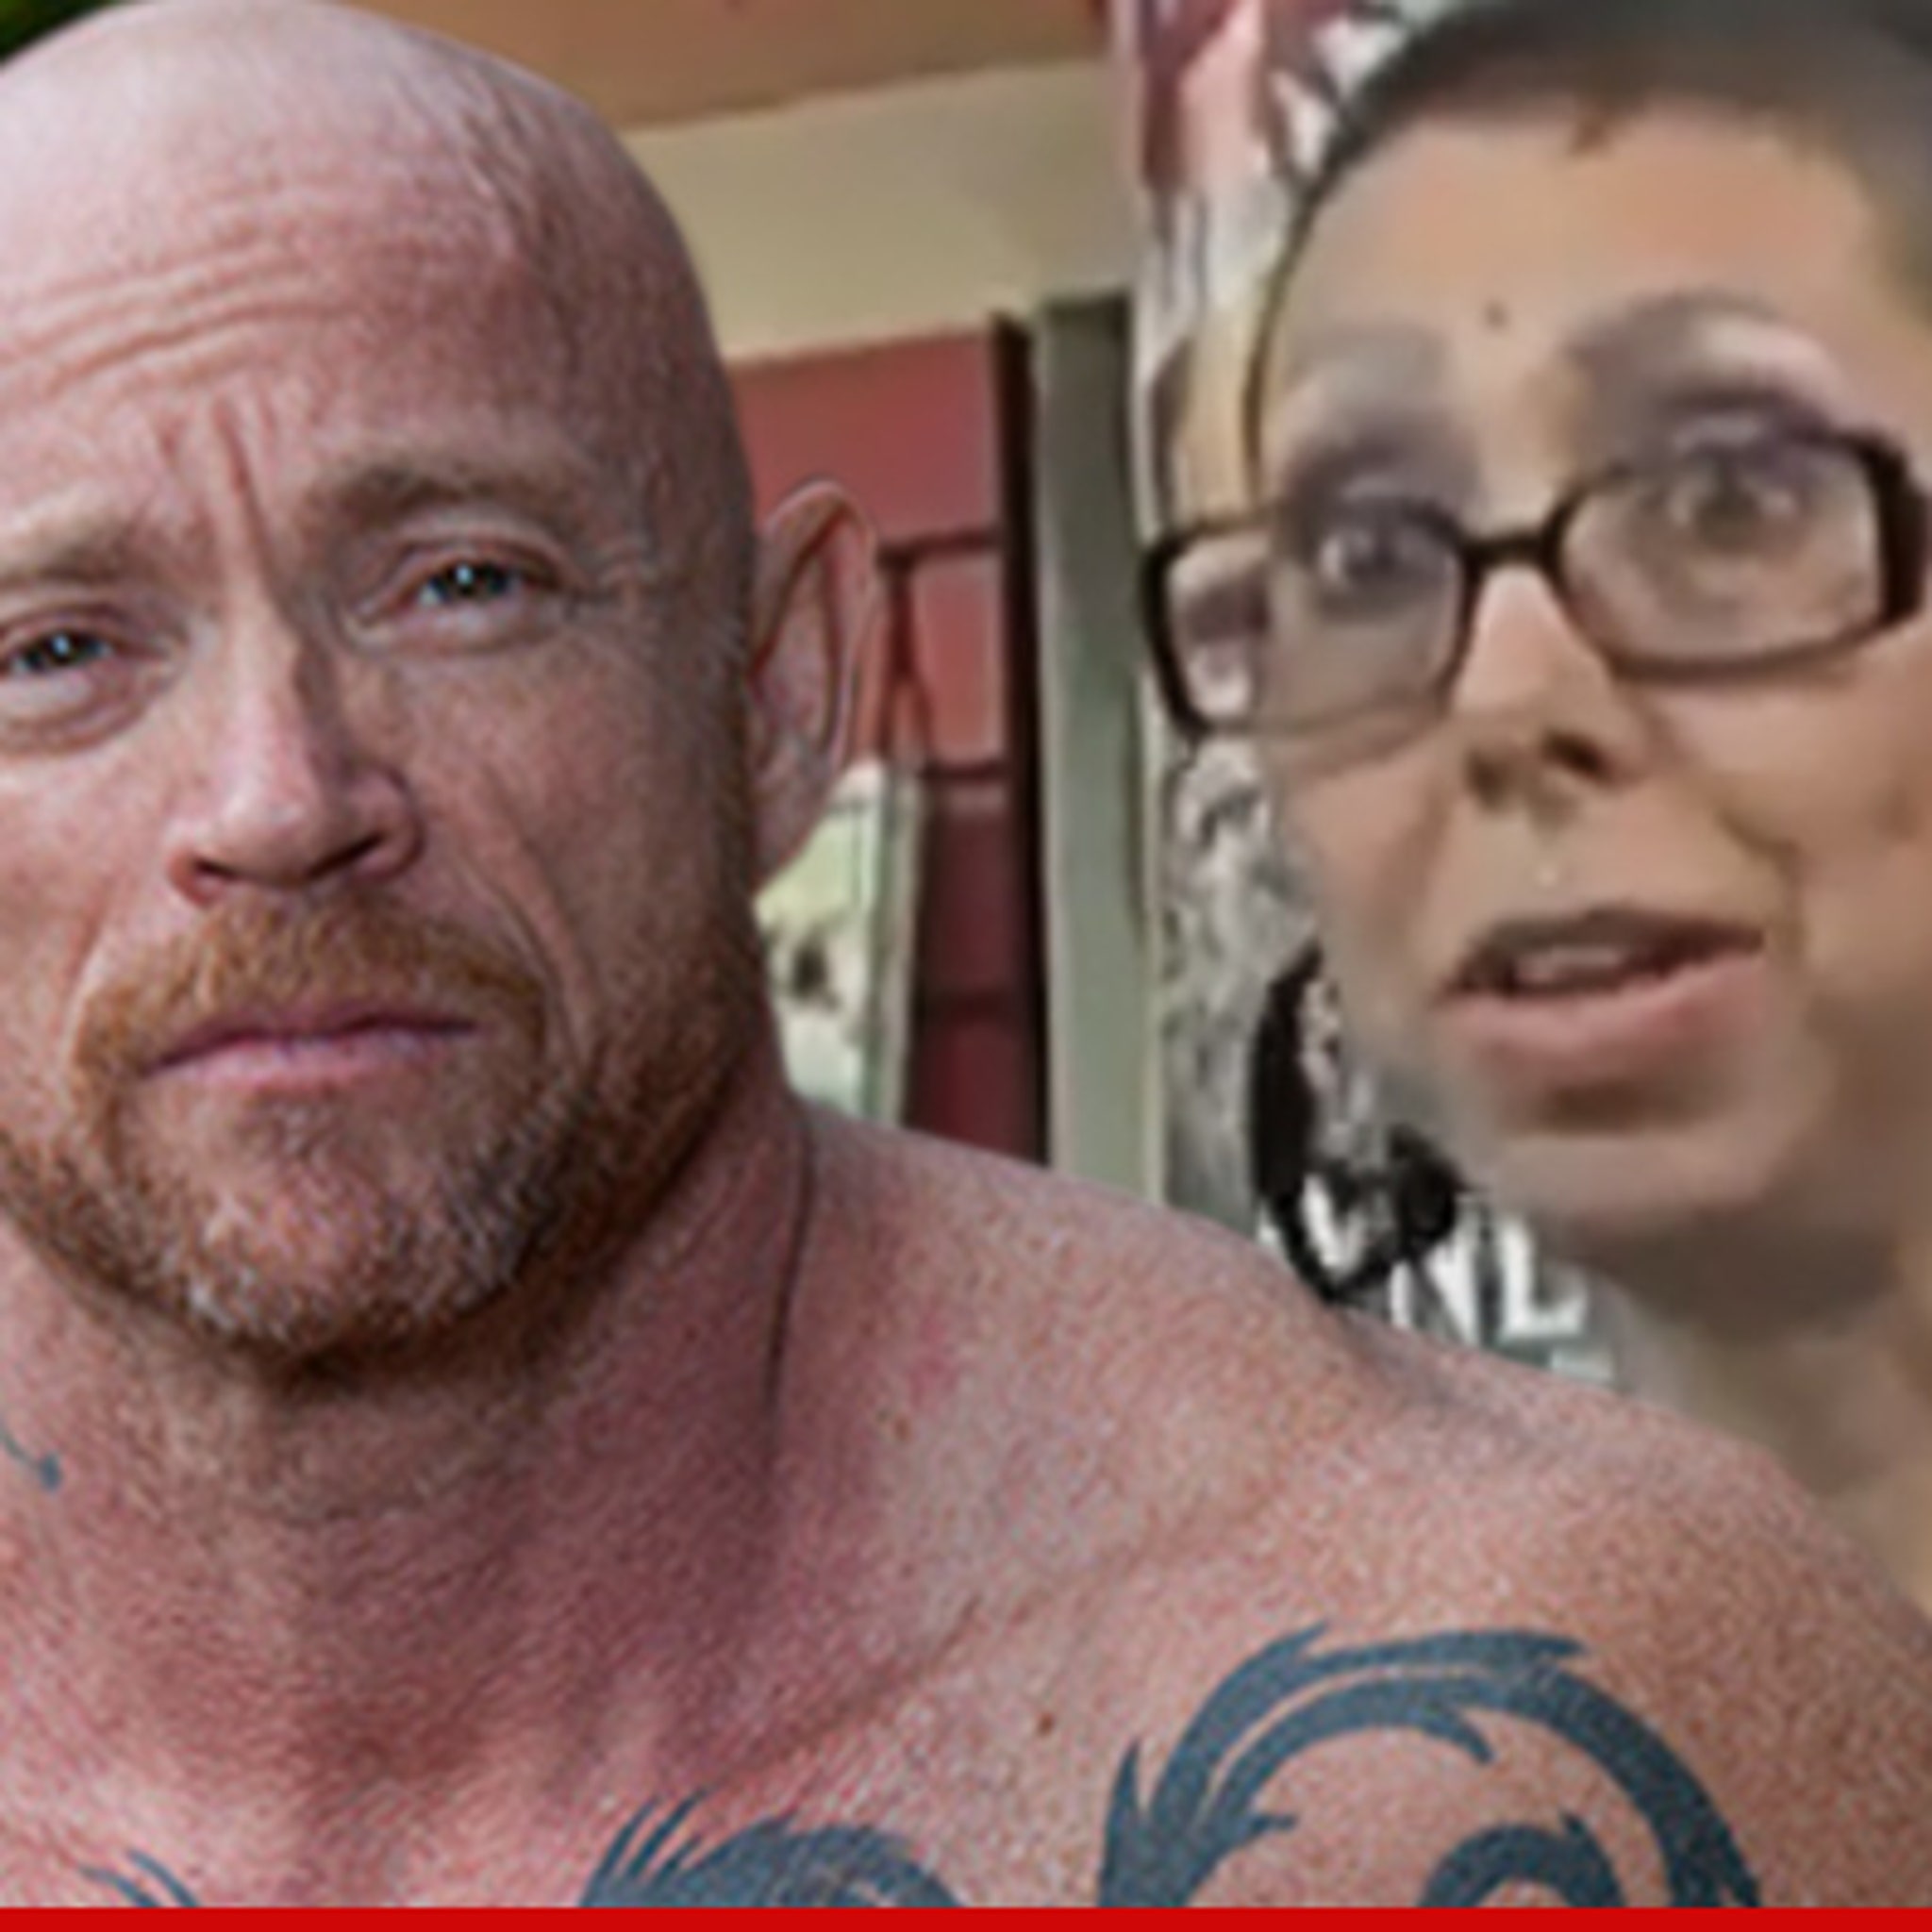 Transsexual Porn Star Buck Angel -- Im a Man, Baby! Now I Can Get Divorced